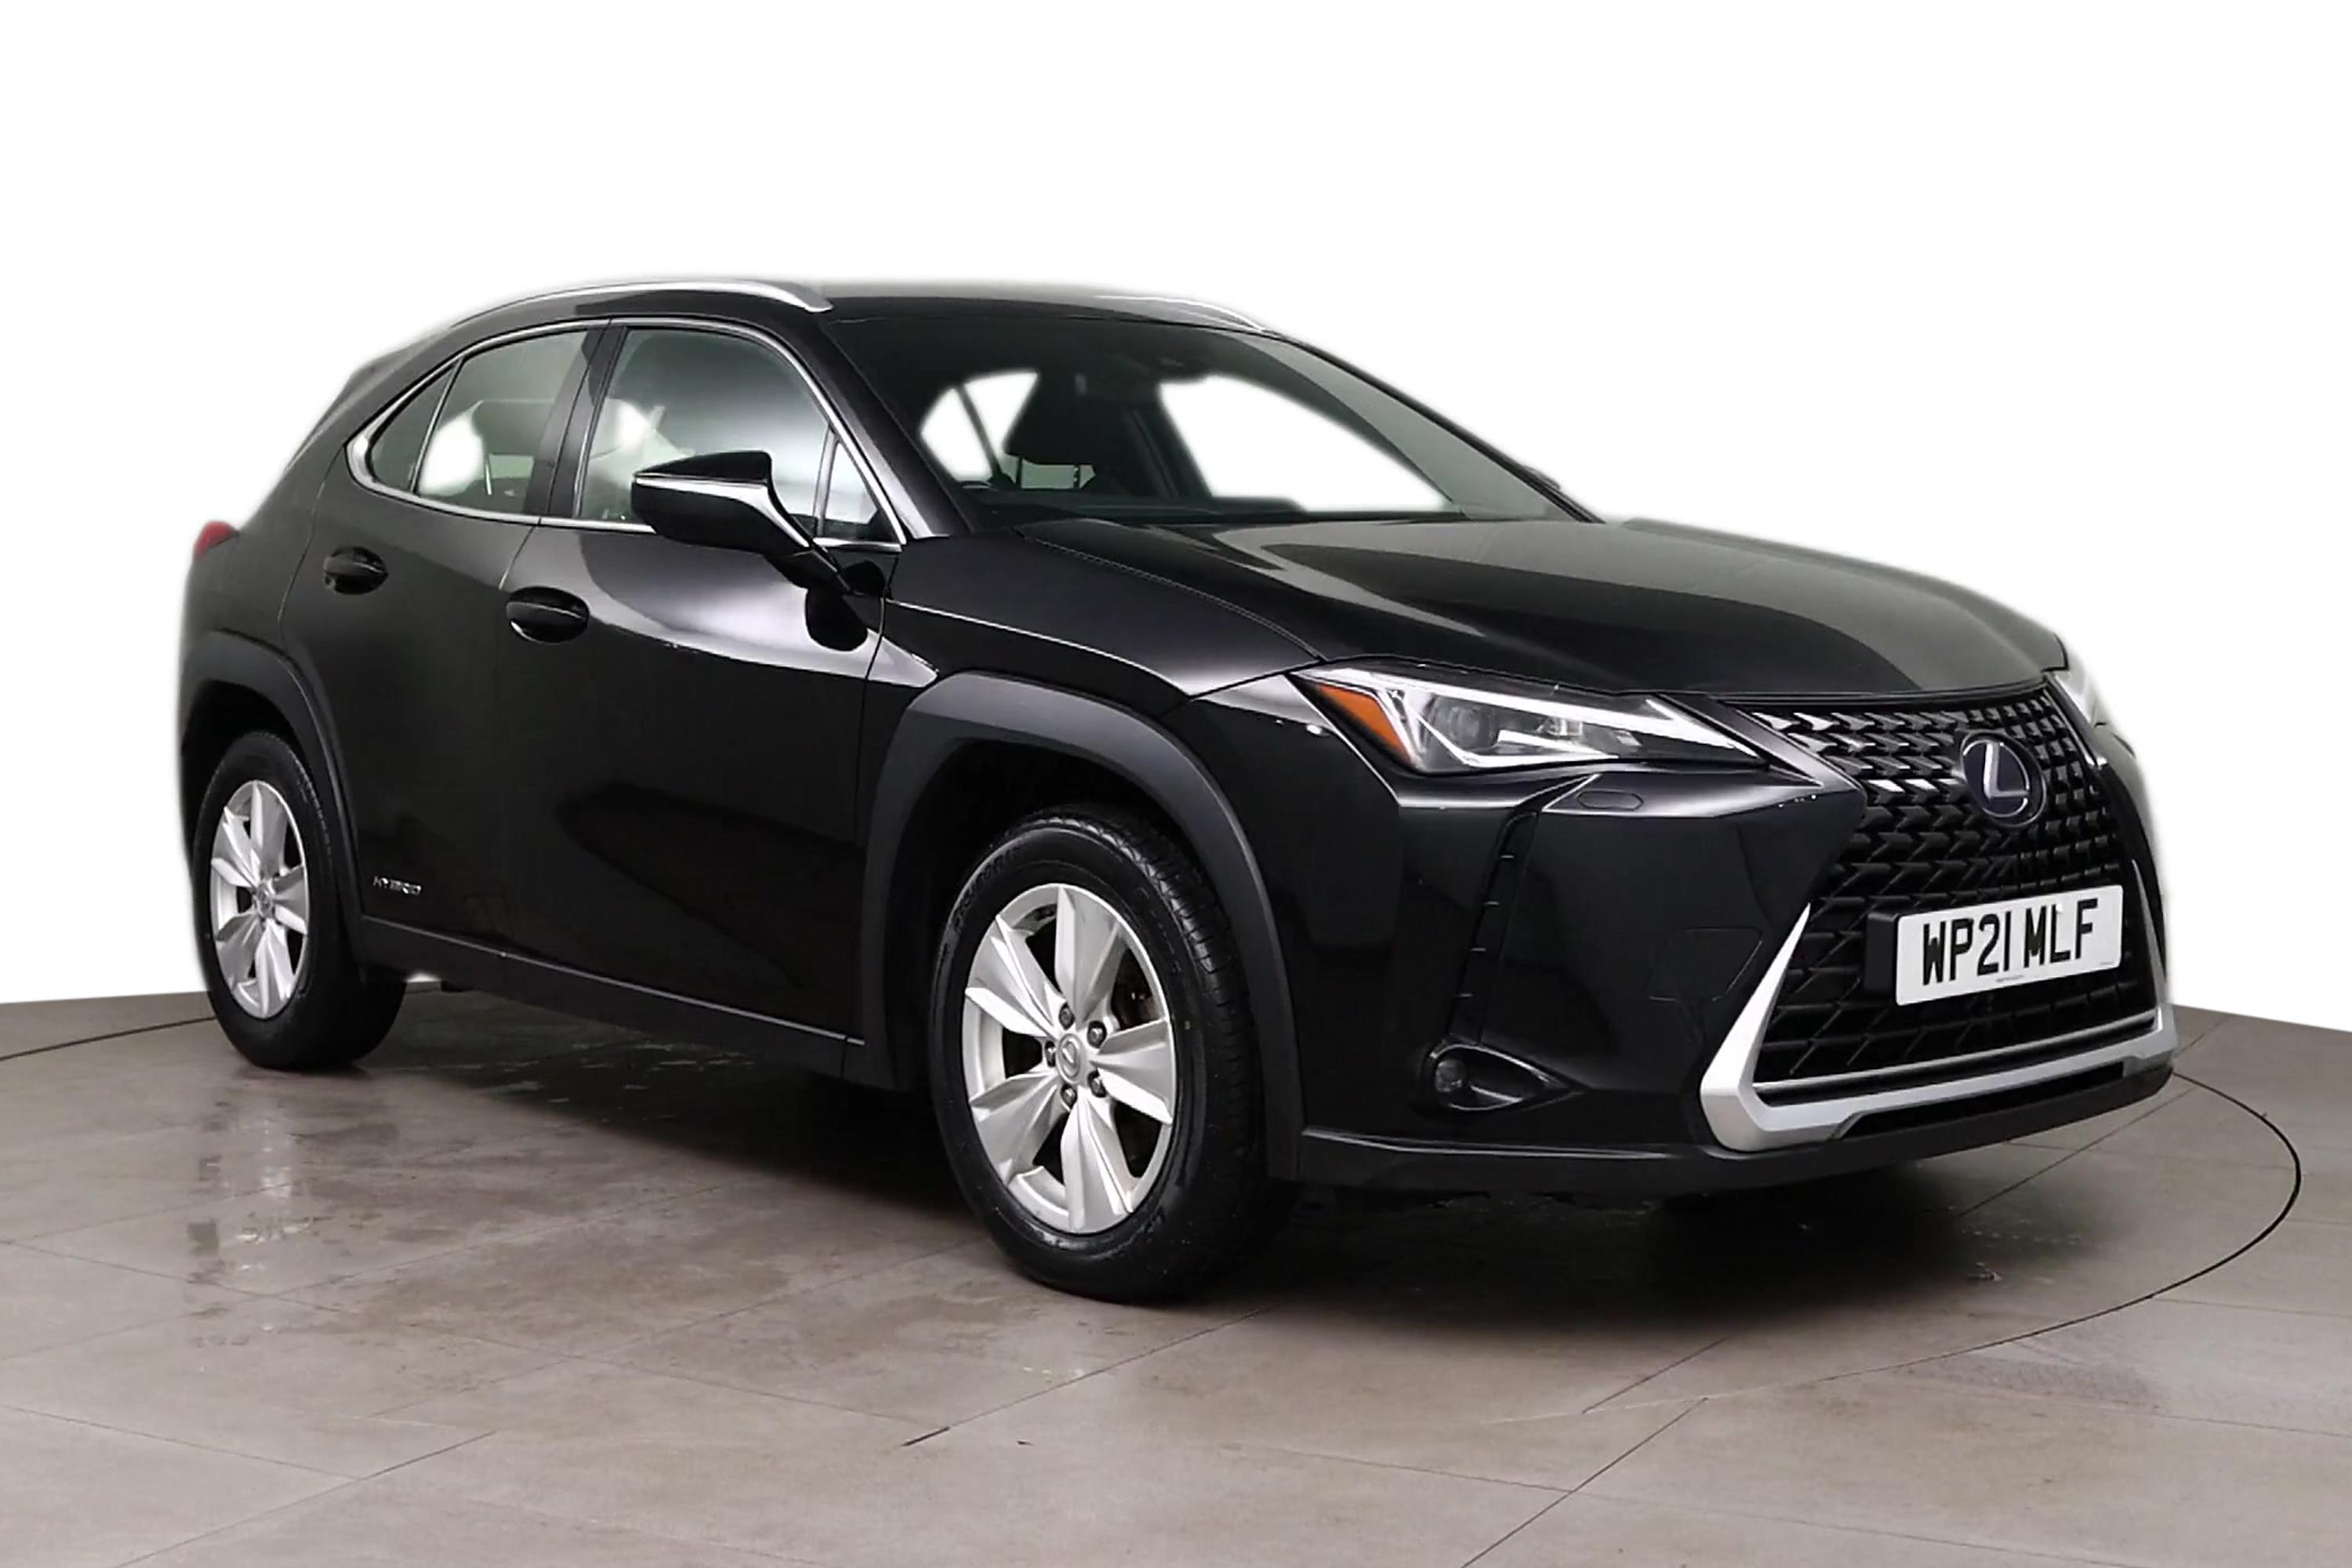 2021 used Lexus Ux 250h 2.0 5dr CVT [without Nav]